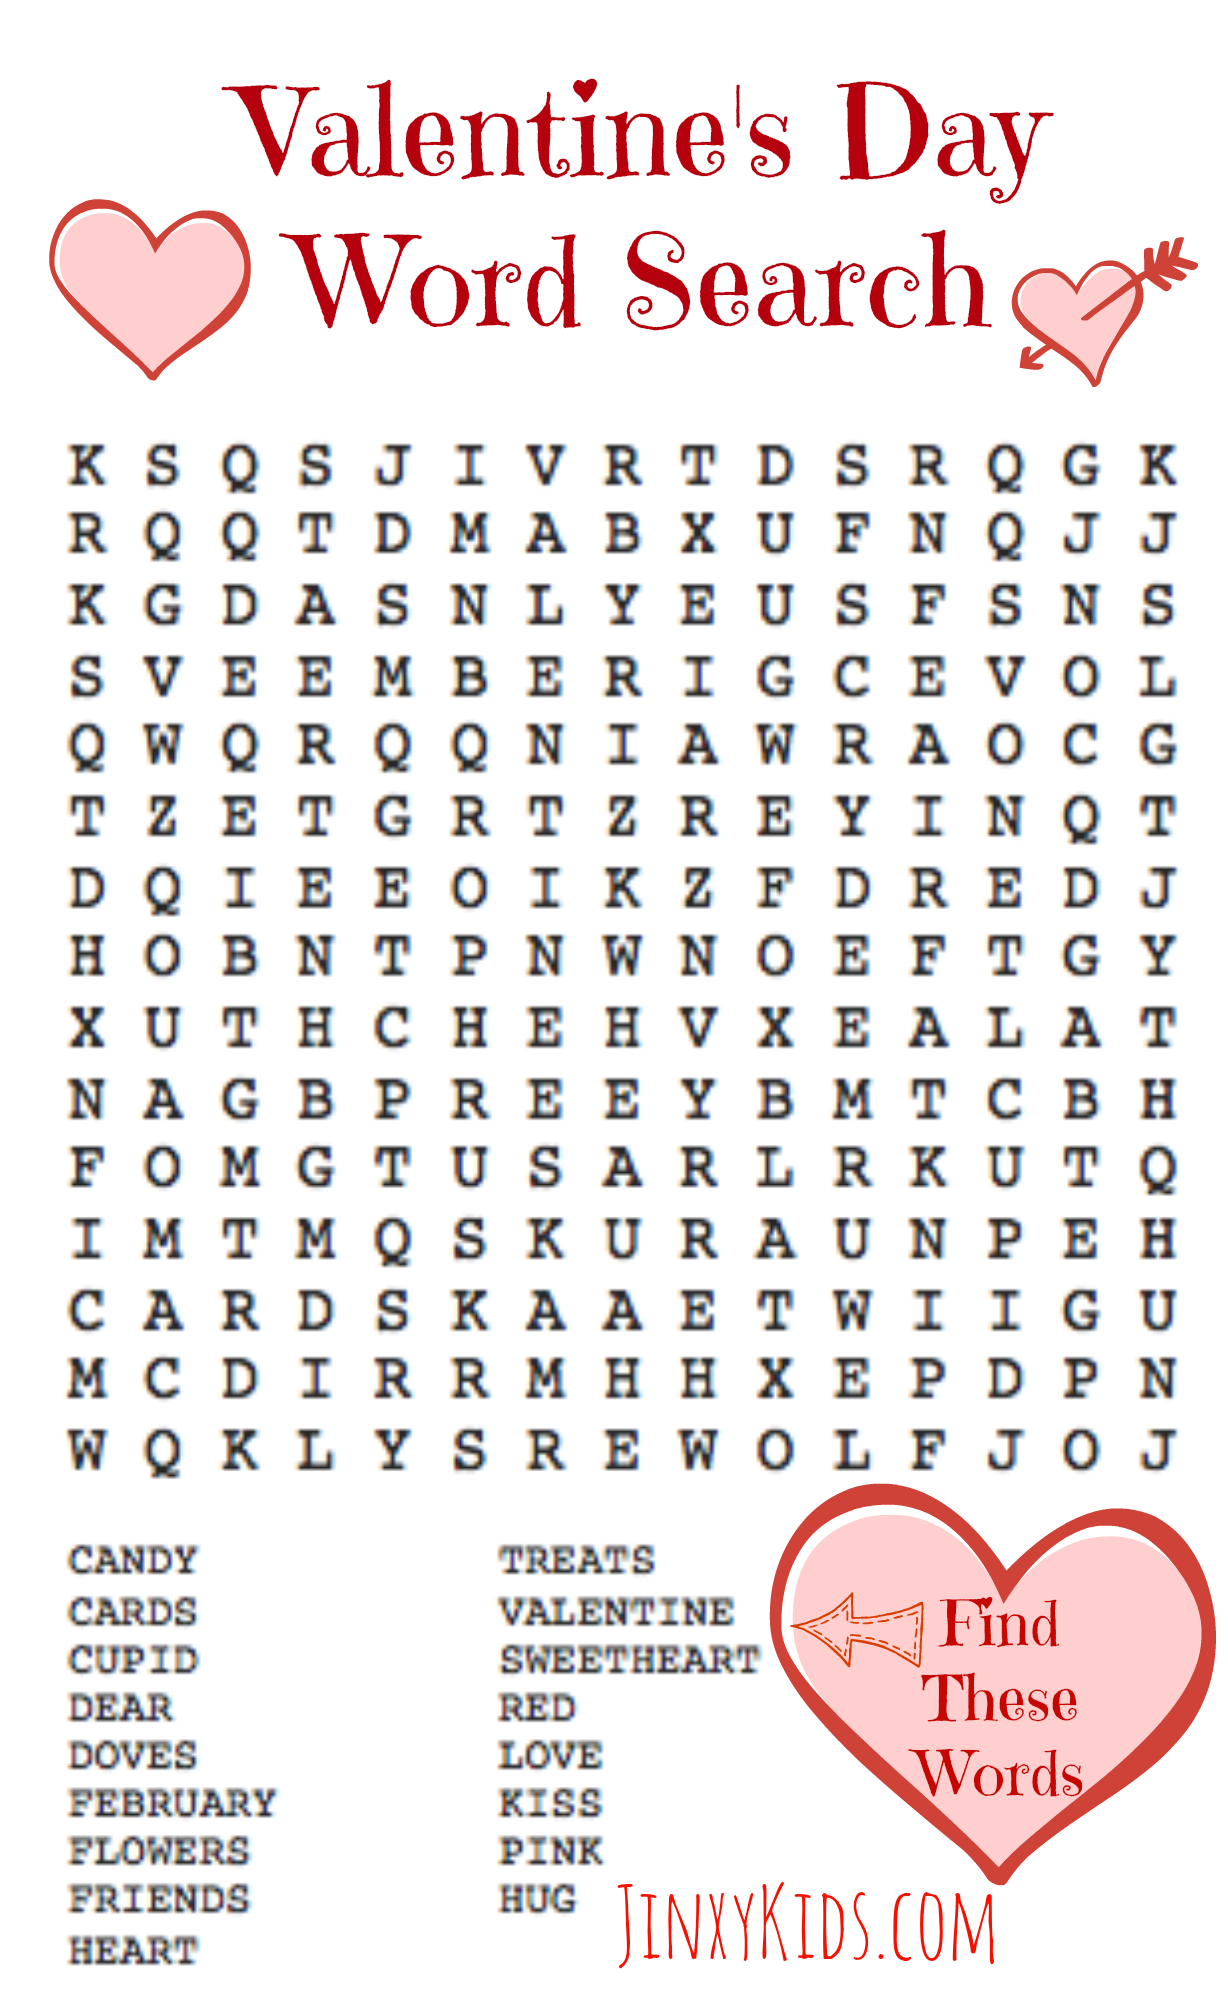 Valentine's Day Recipes, Crafts, Printables and MORE! - Thrifty Jinxy